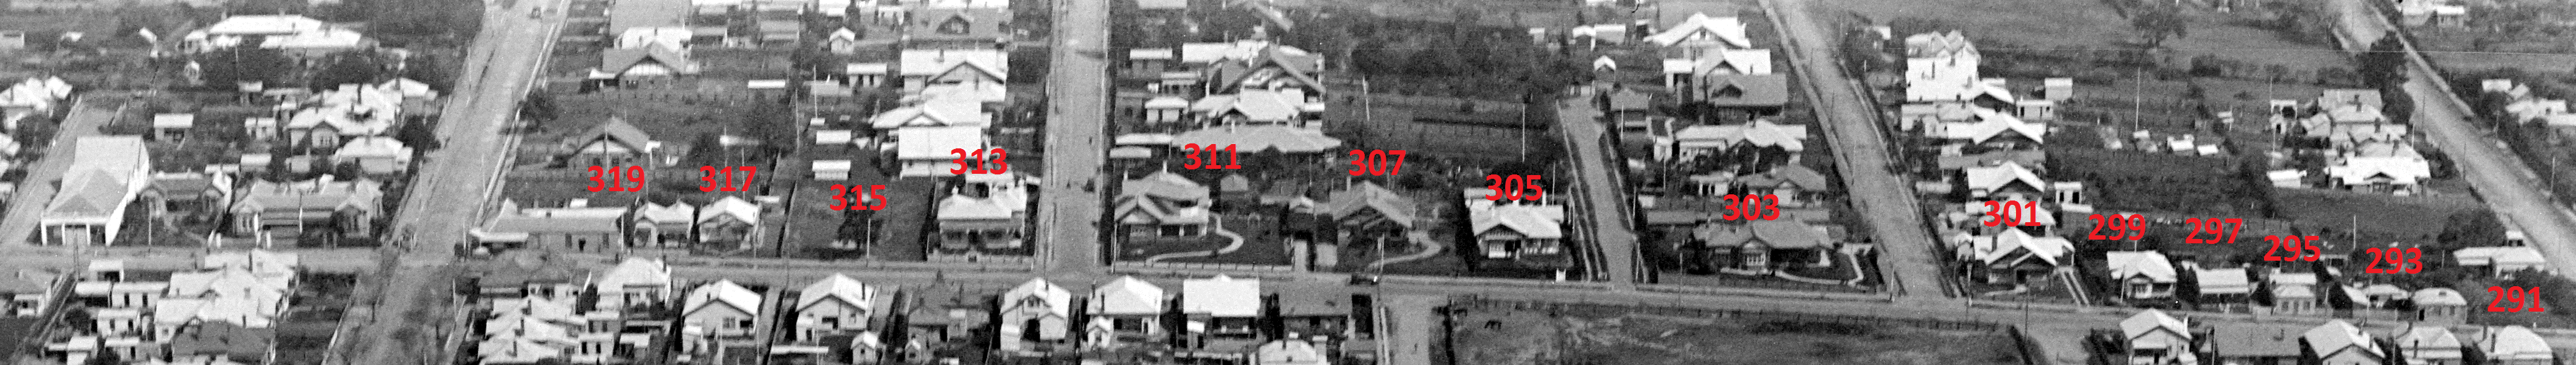 Figure 9: West Melbourne Road, showing properties on west side between 291 and 319 Shannon Avenue (with red numbers represent the current addresses of the properties), October 1927. Source: C. Pratt, La Trobe Picture collection, State Library of Victoria,